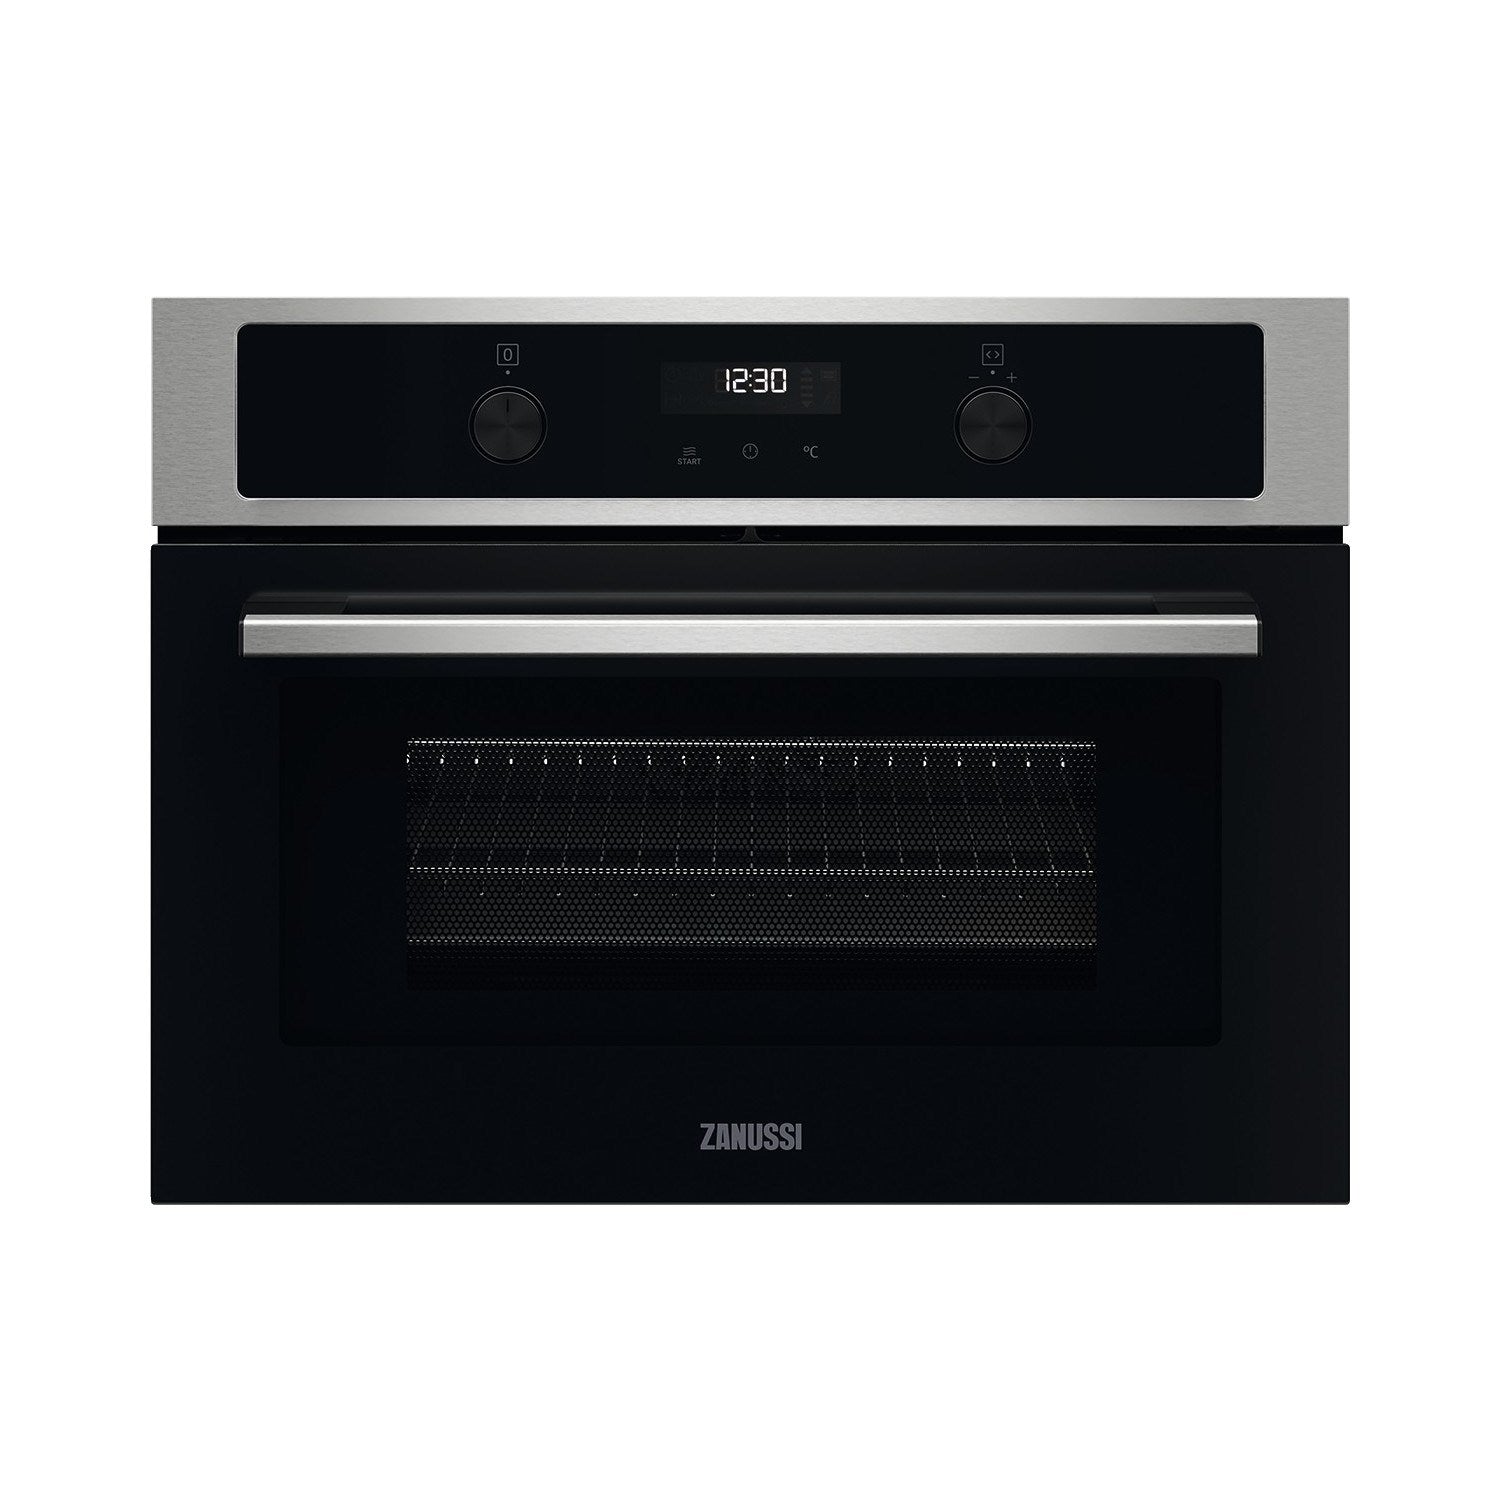 Zanussi ZVENM7X1 Compact Microwave Built in Oven & Grill Stainless Steel GRADE B